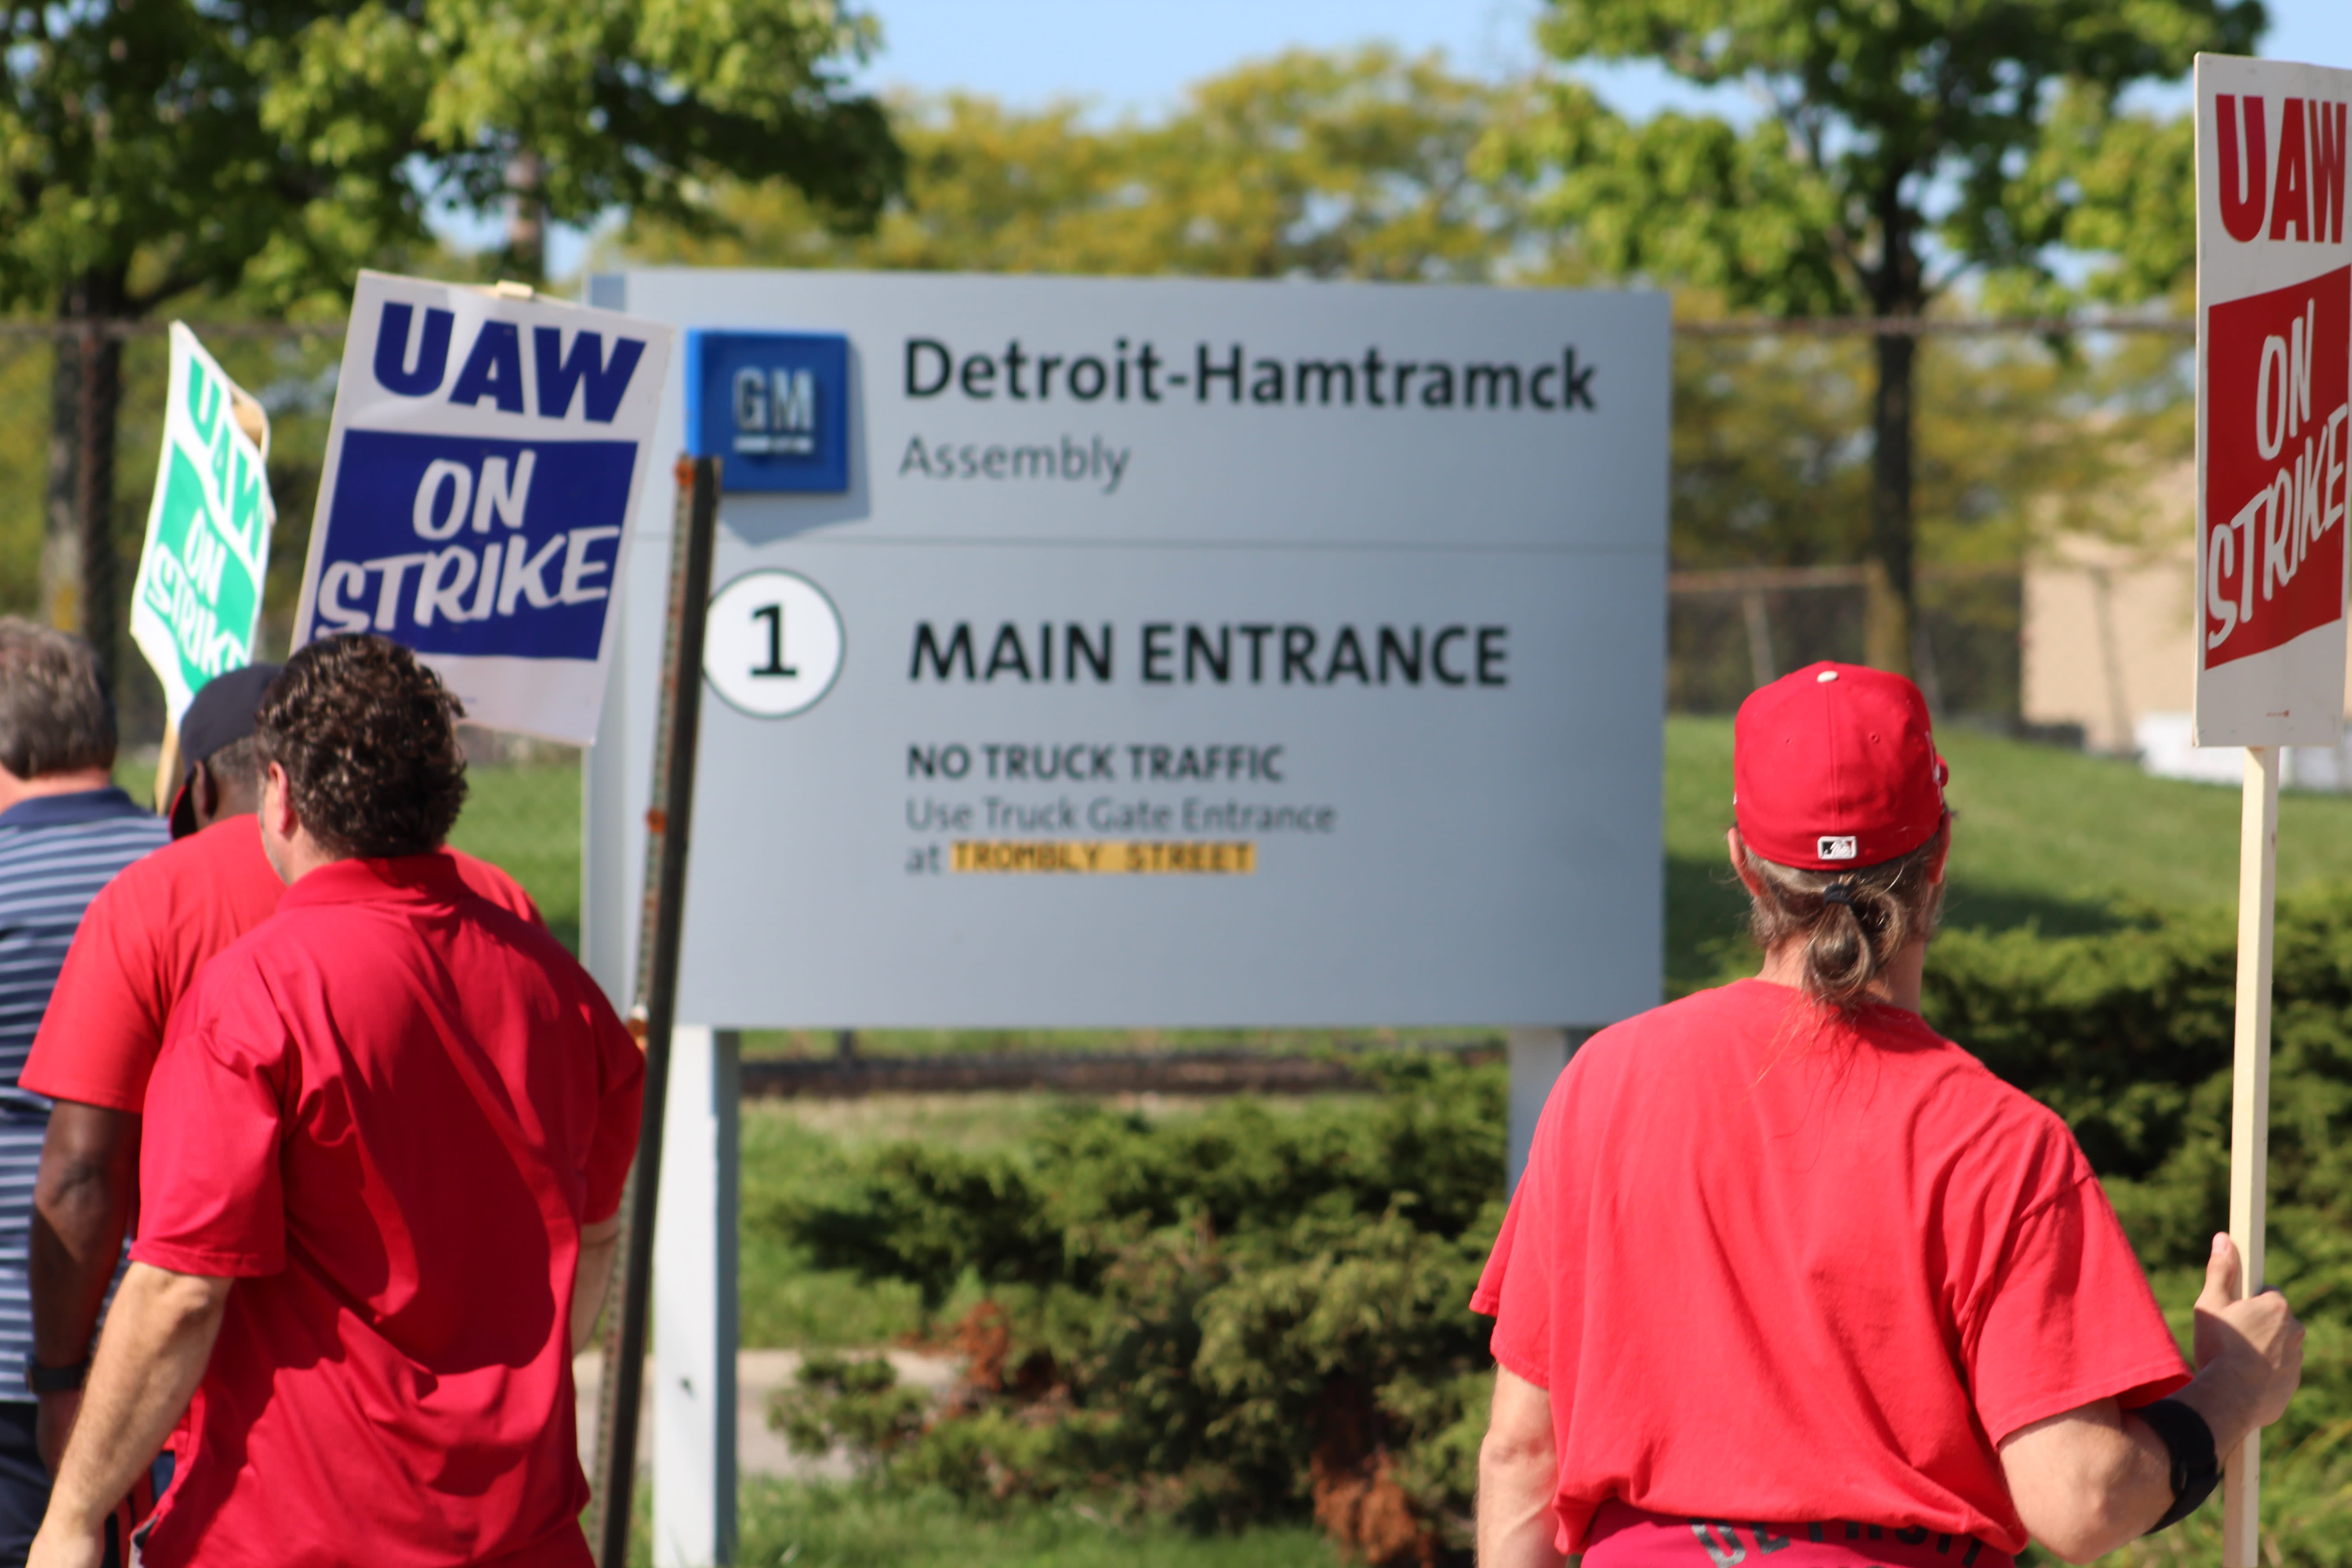 UAW strike threatens Michigan's bonds, could push state into recession